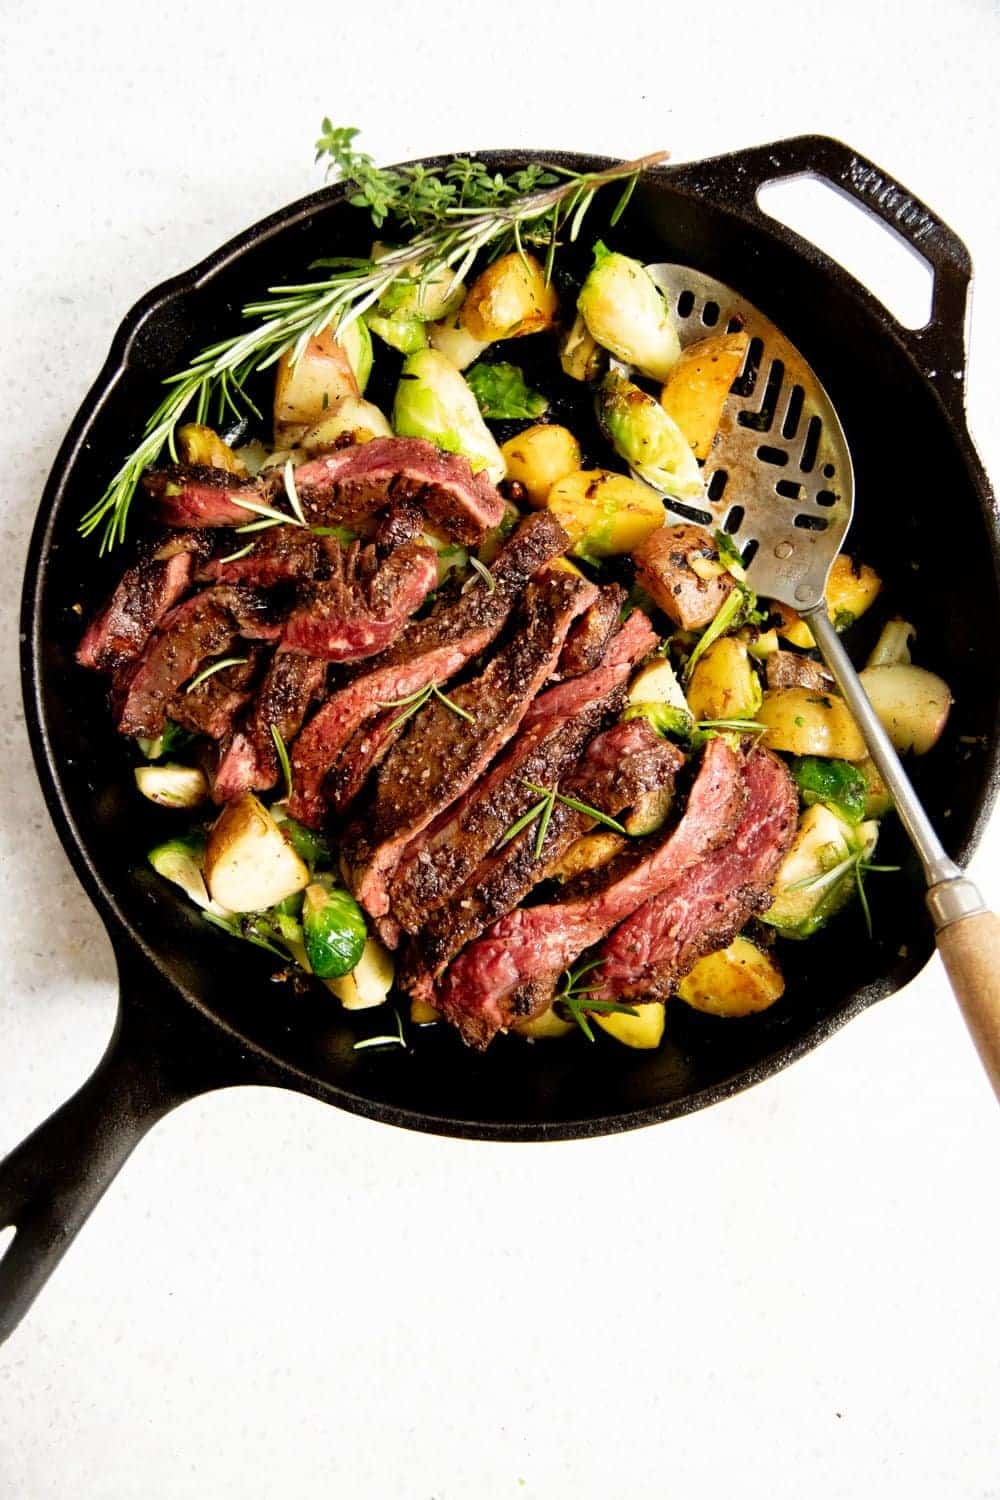 Overhead shot of potatoes and Brussels sprouts in a cast iron skillet, topped with a sliced seared steak